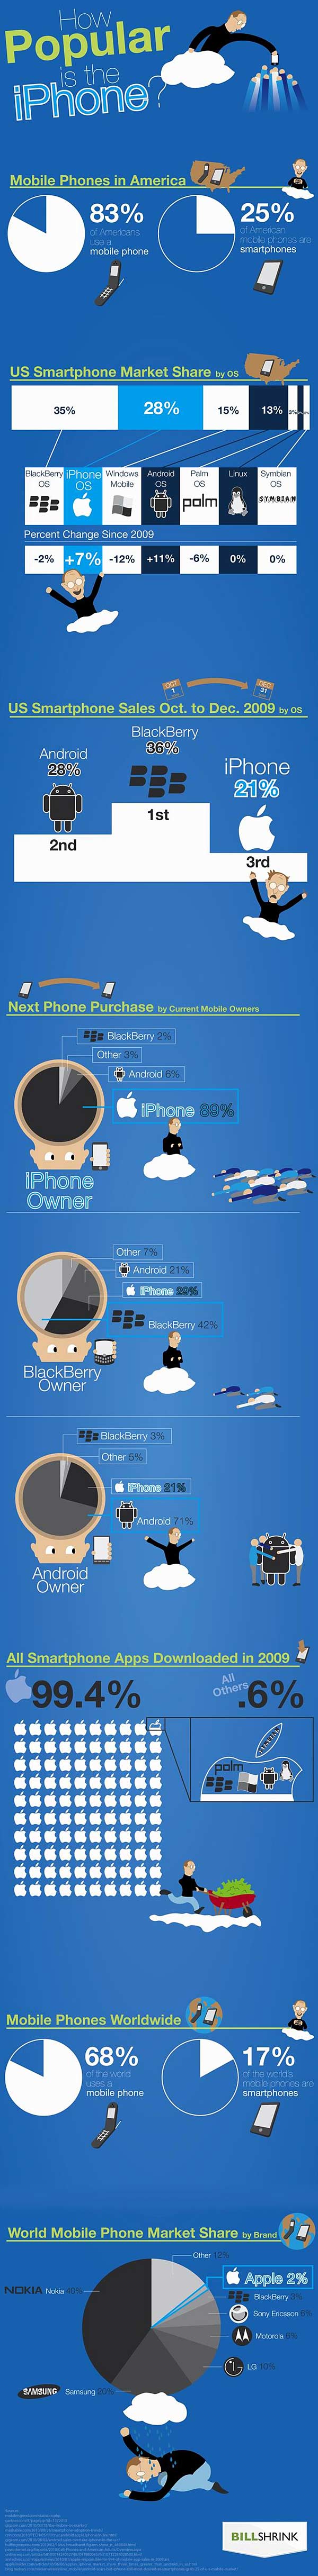 So just how popular is the iPhone?